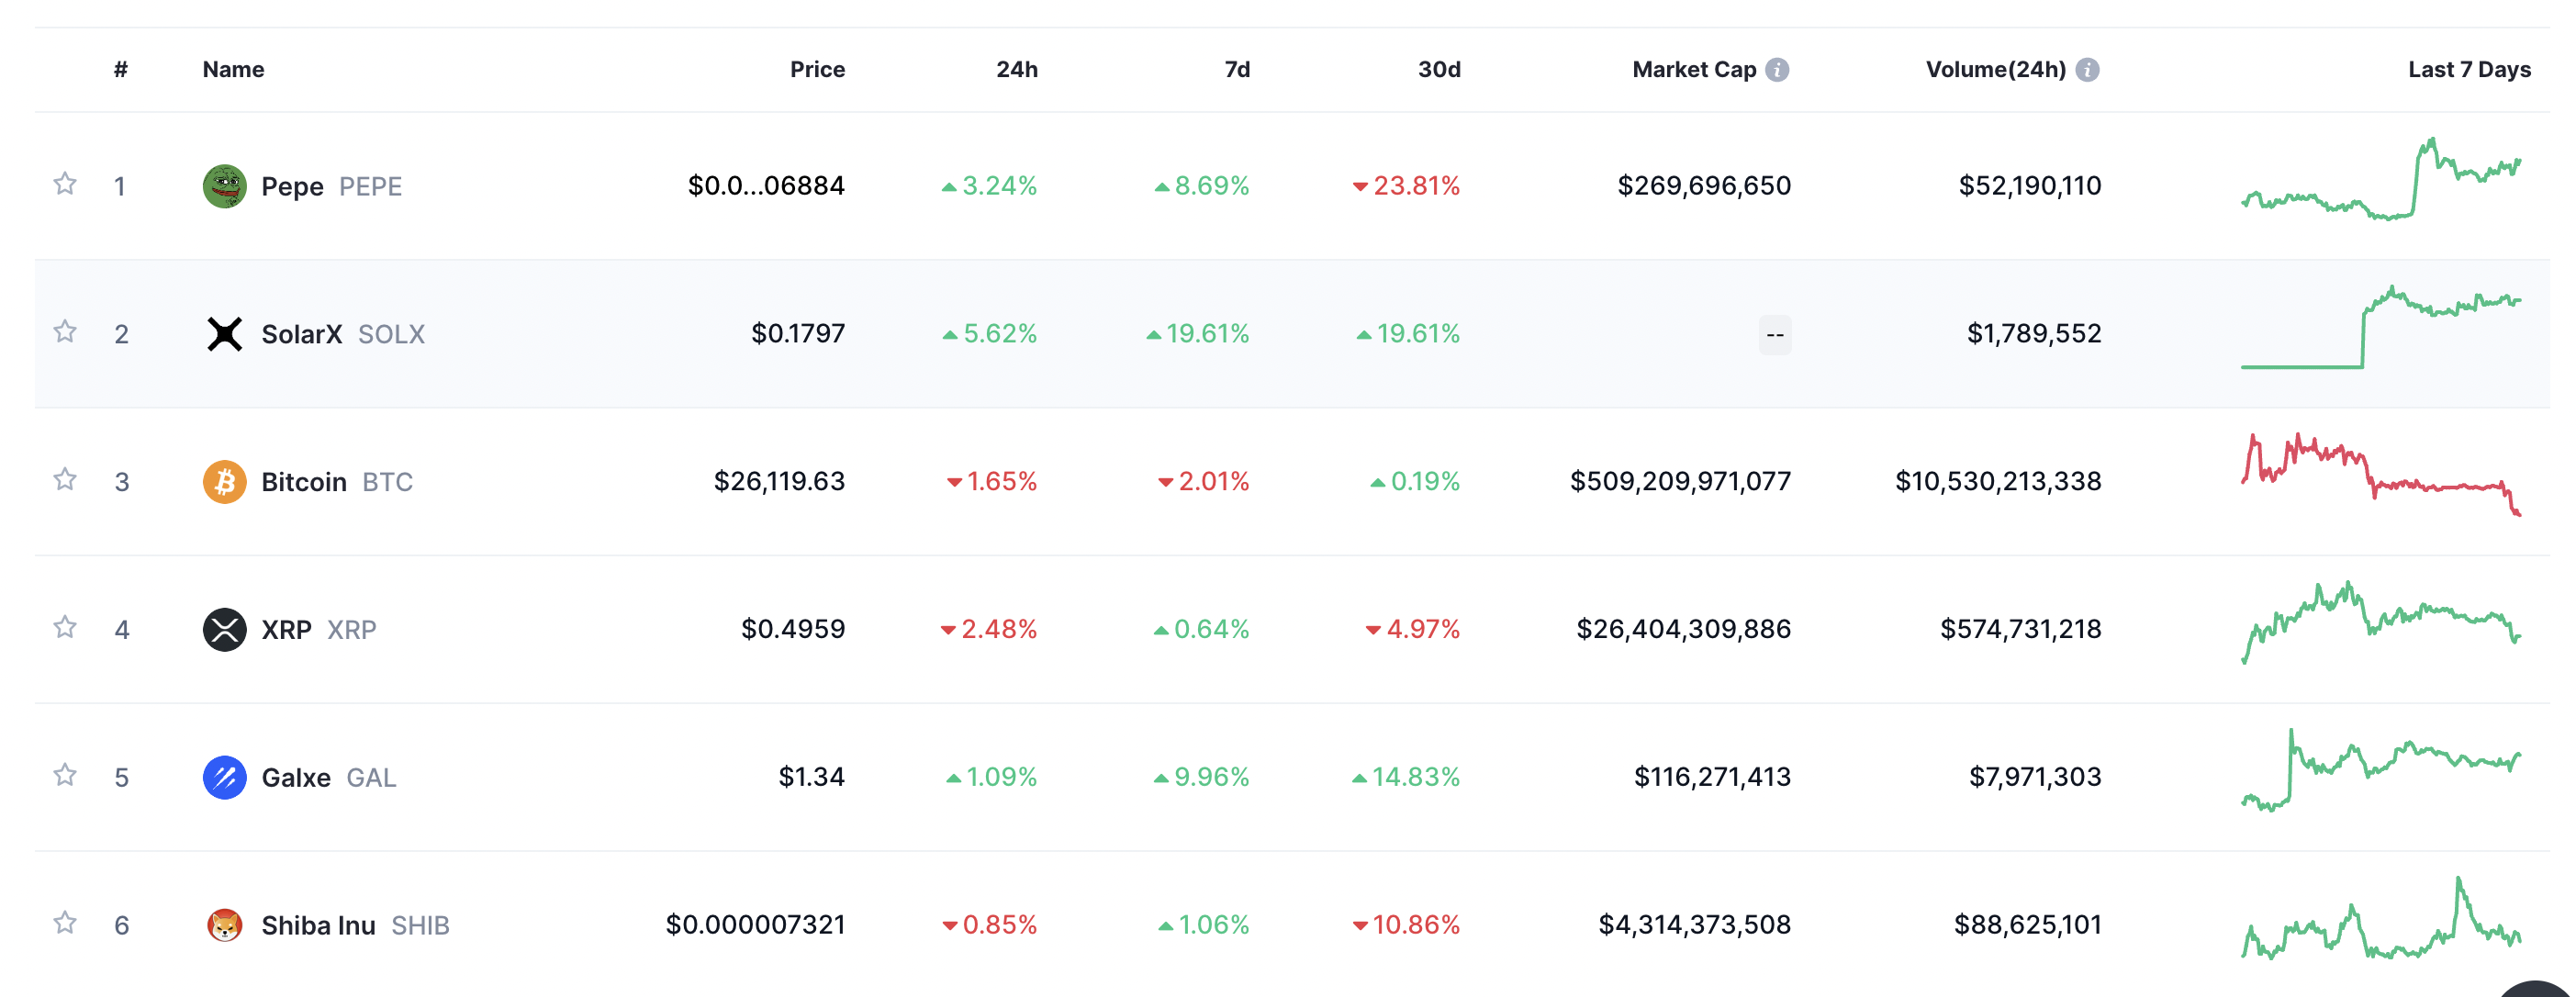 What Are The Trending Cryptocurrencies On CoinMarketCap? 